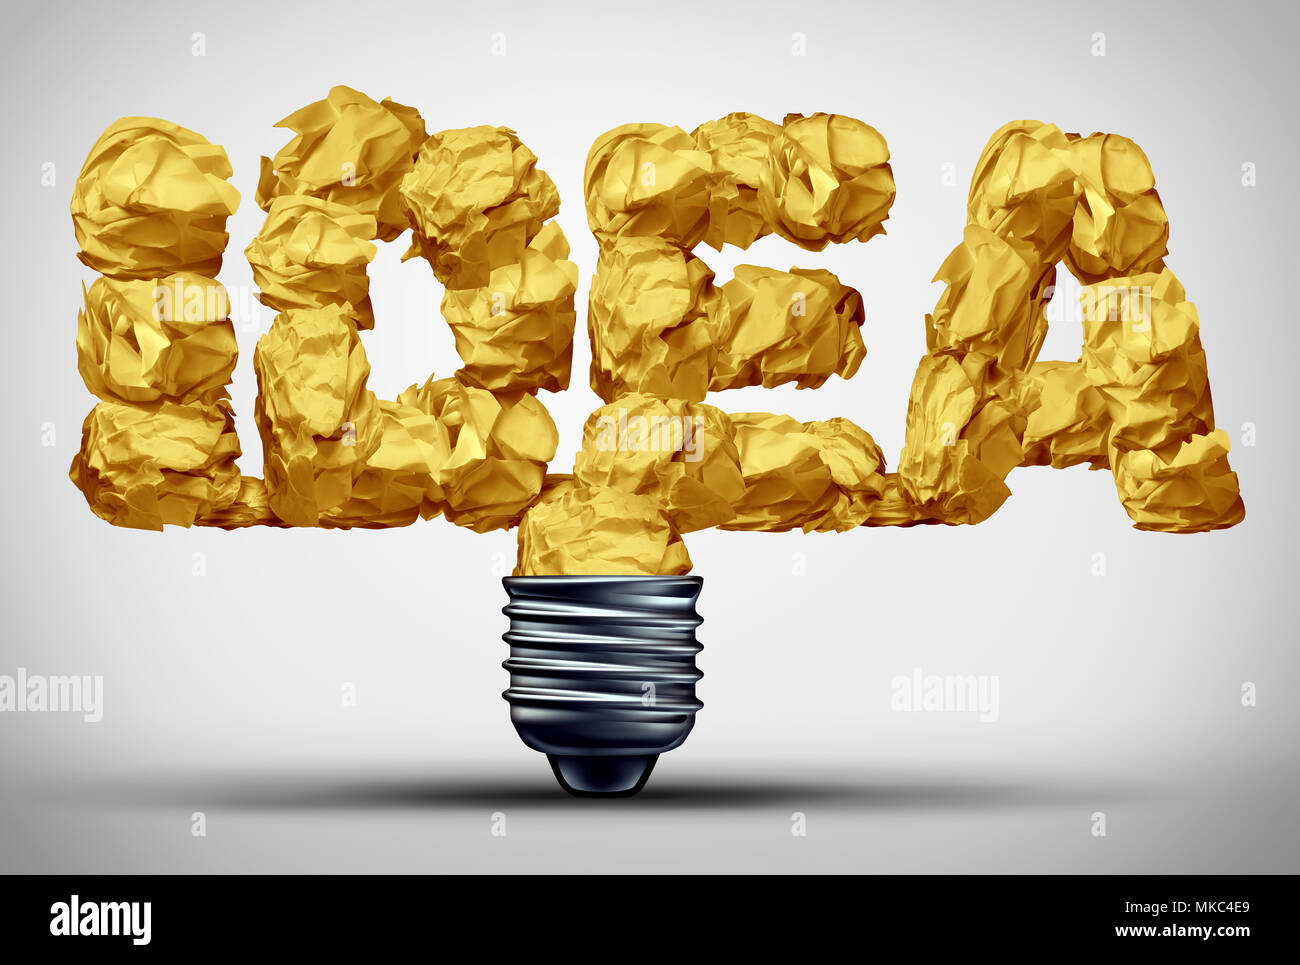 Concept of inspiration and idea motivation as crumpled paper shaped as text with 3D illustration elements. Stock Photo